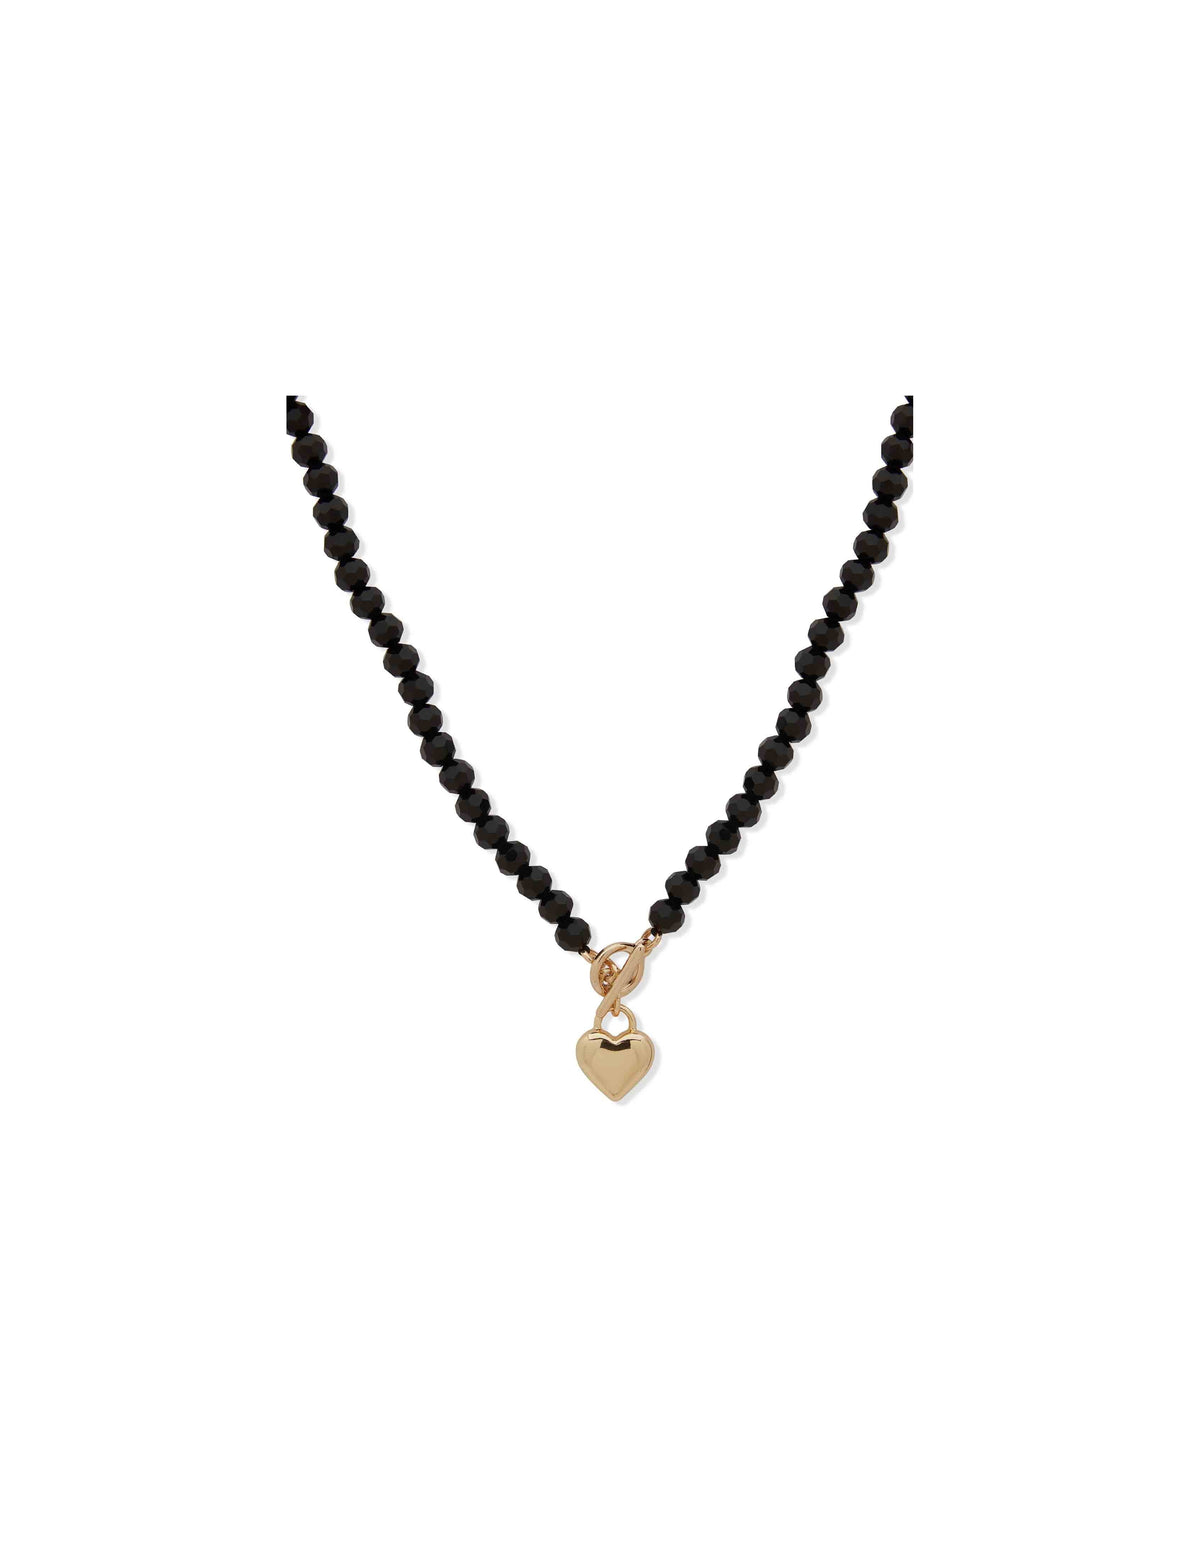 Anne Klein Gold Tone Heart Pendant Necklace With Jet Beads